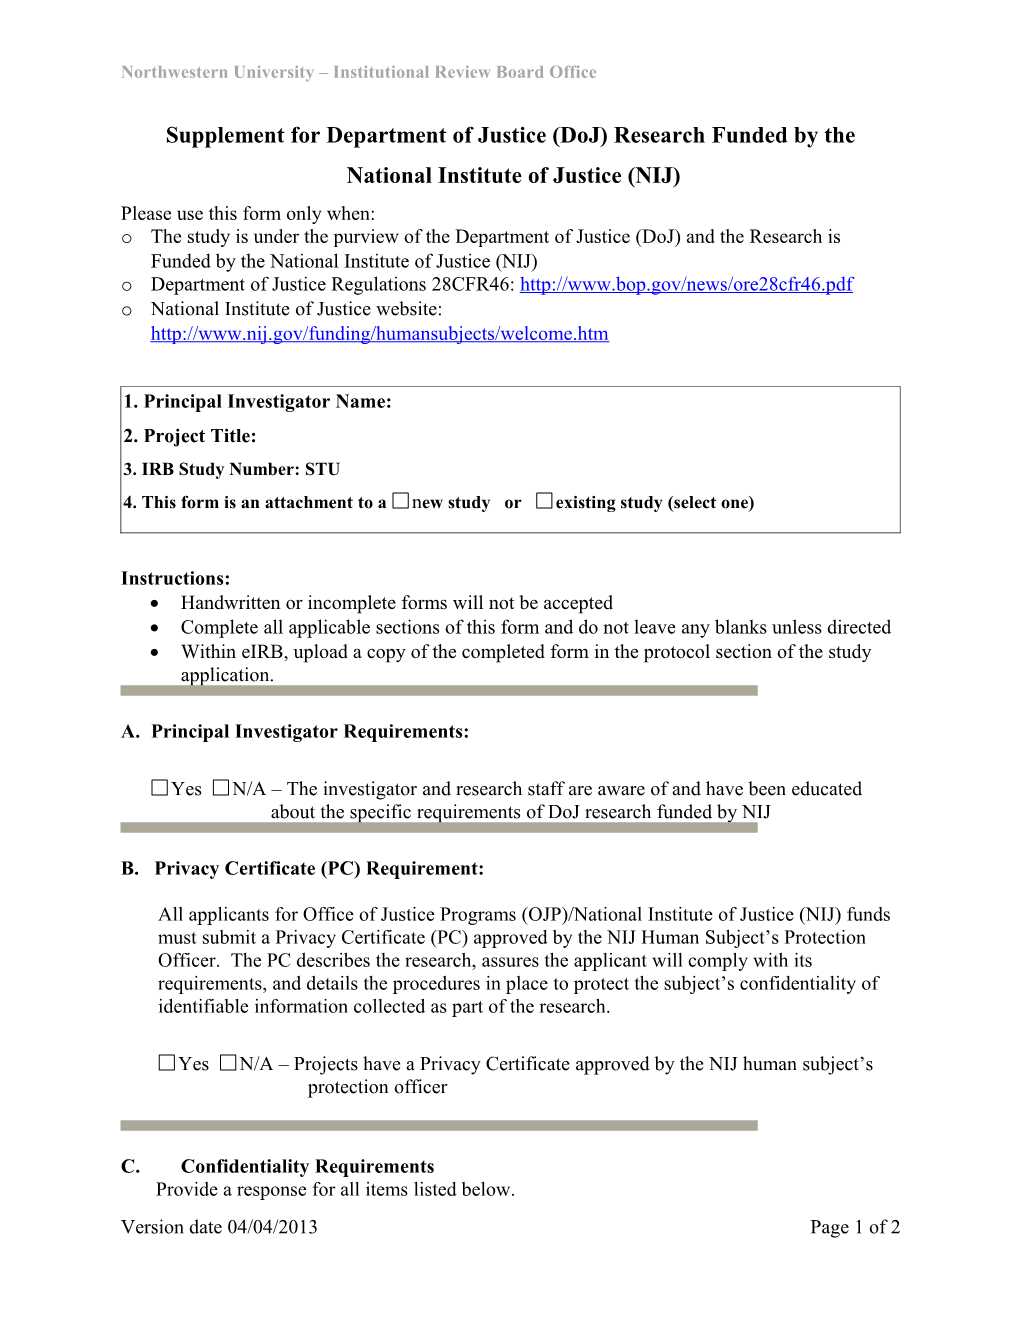 Department of Justice and National Institute of Justice Checklist